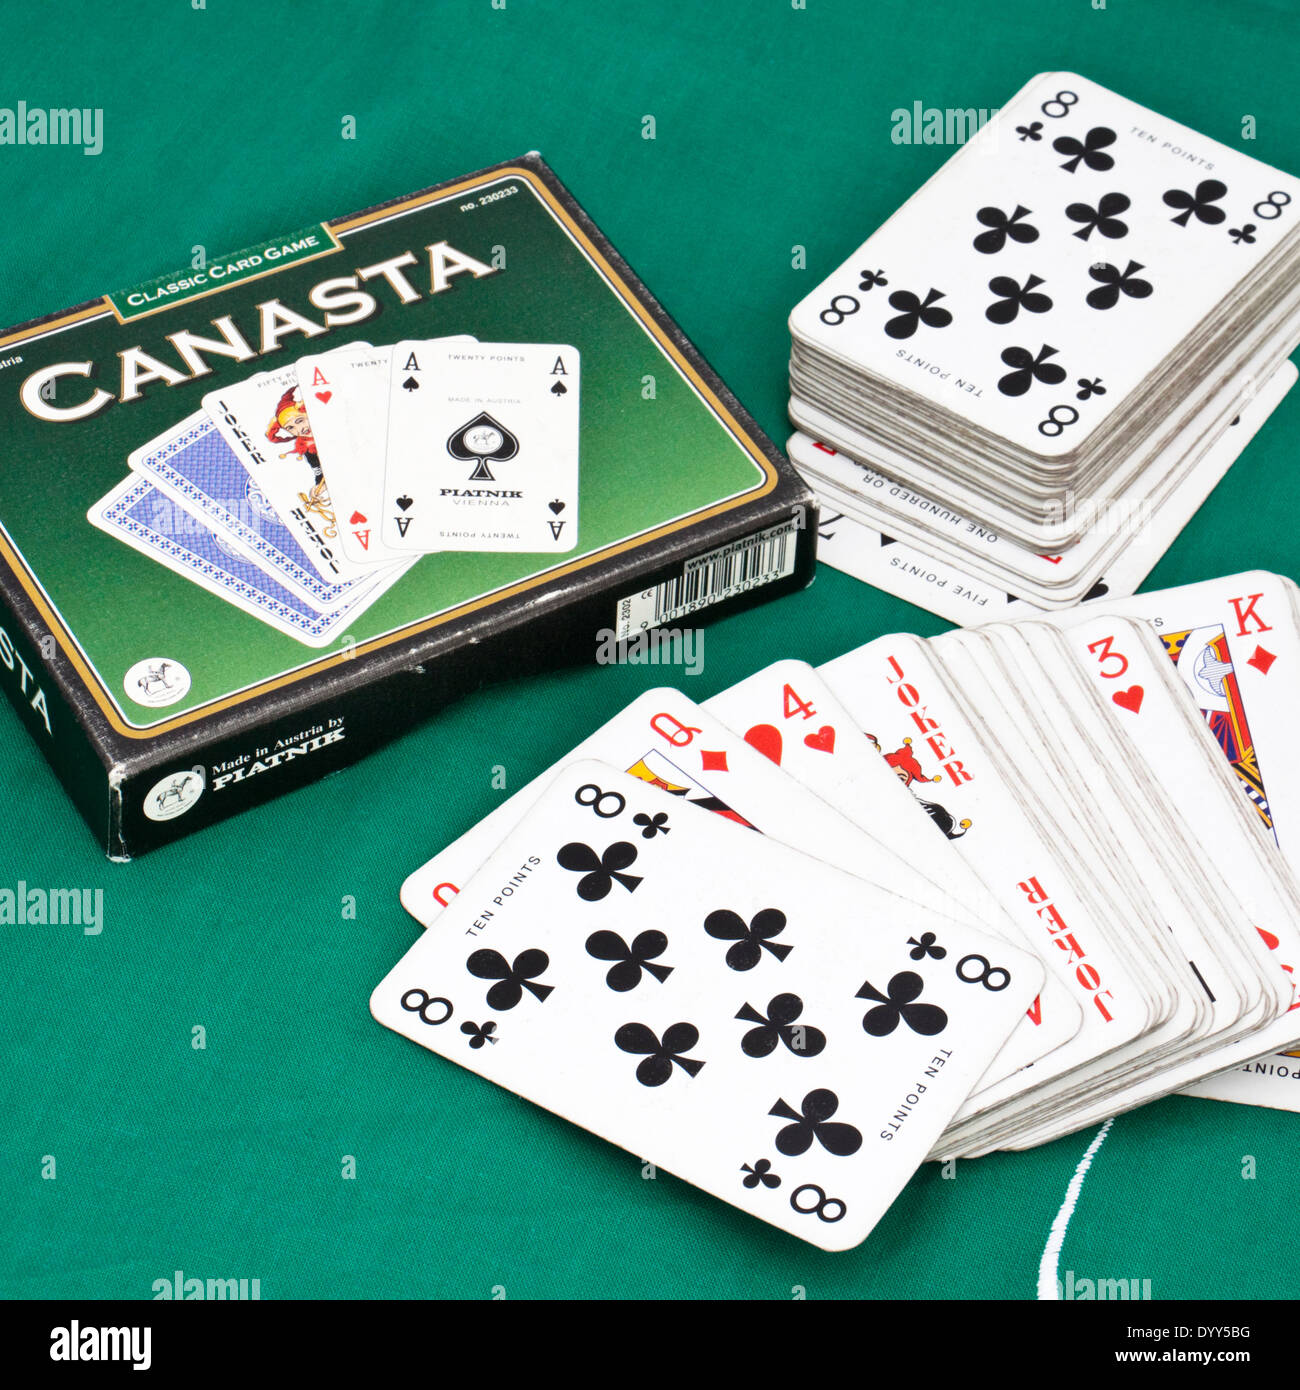 Canasta playing cards, made by Piatnik in Austria Stock Photo